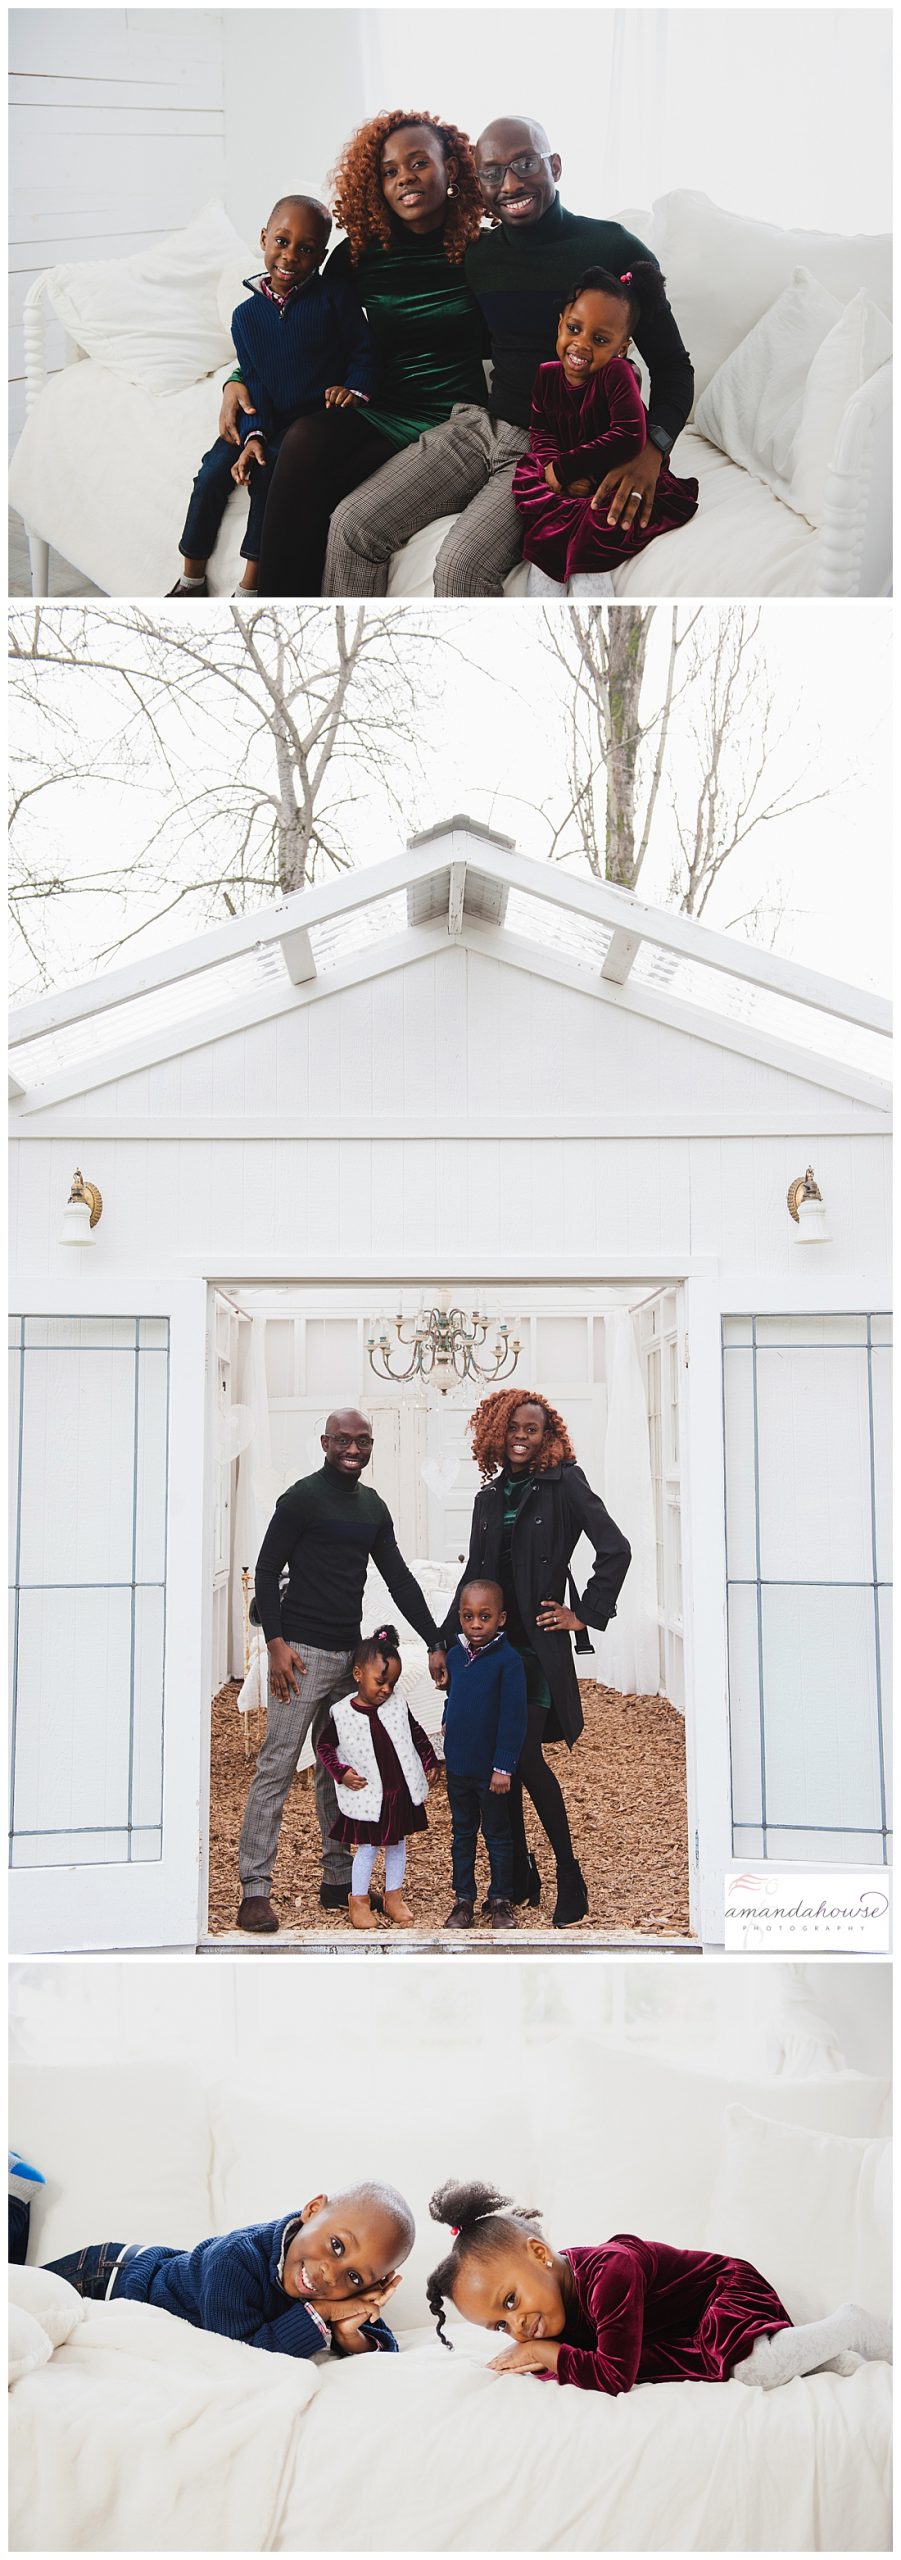 Family Pose Ideas for Winter Portraits | Best Place for Indoor and Outdoor Portraits in Tacoma | Photographed by Amanda Howse